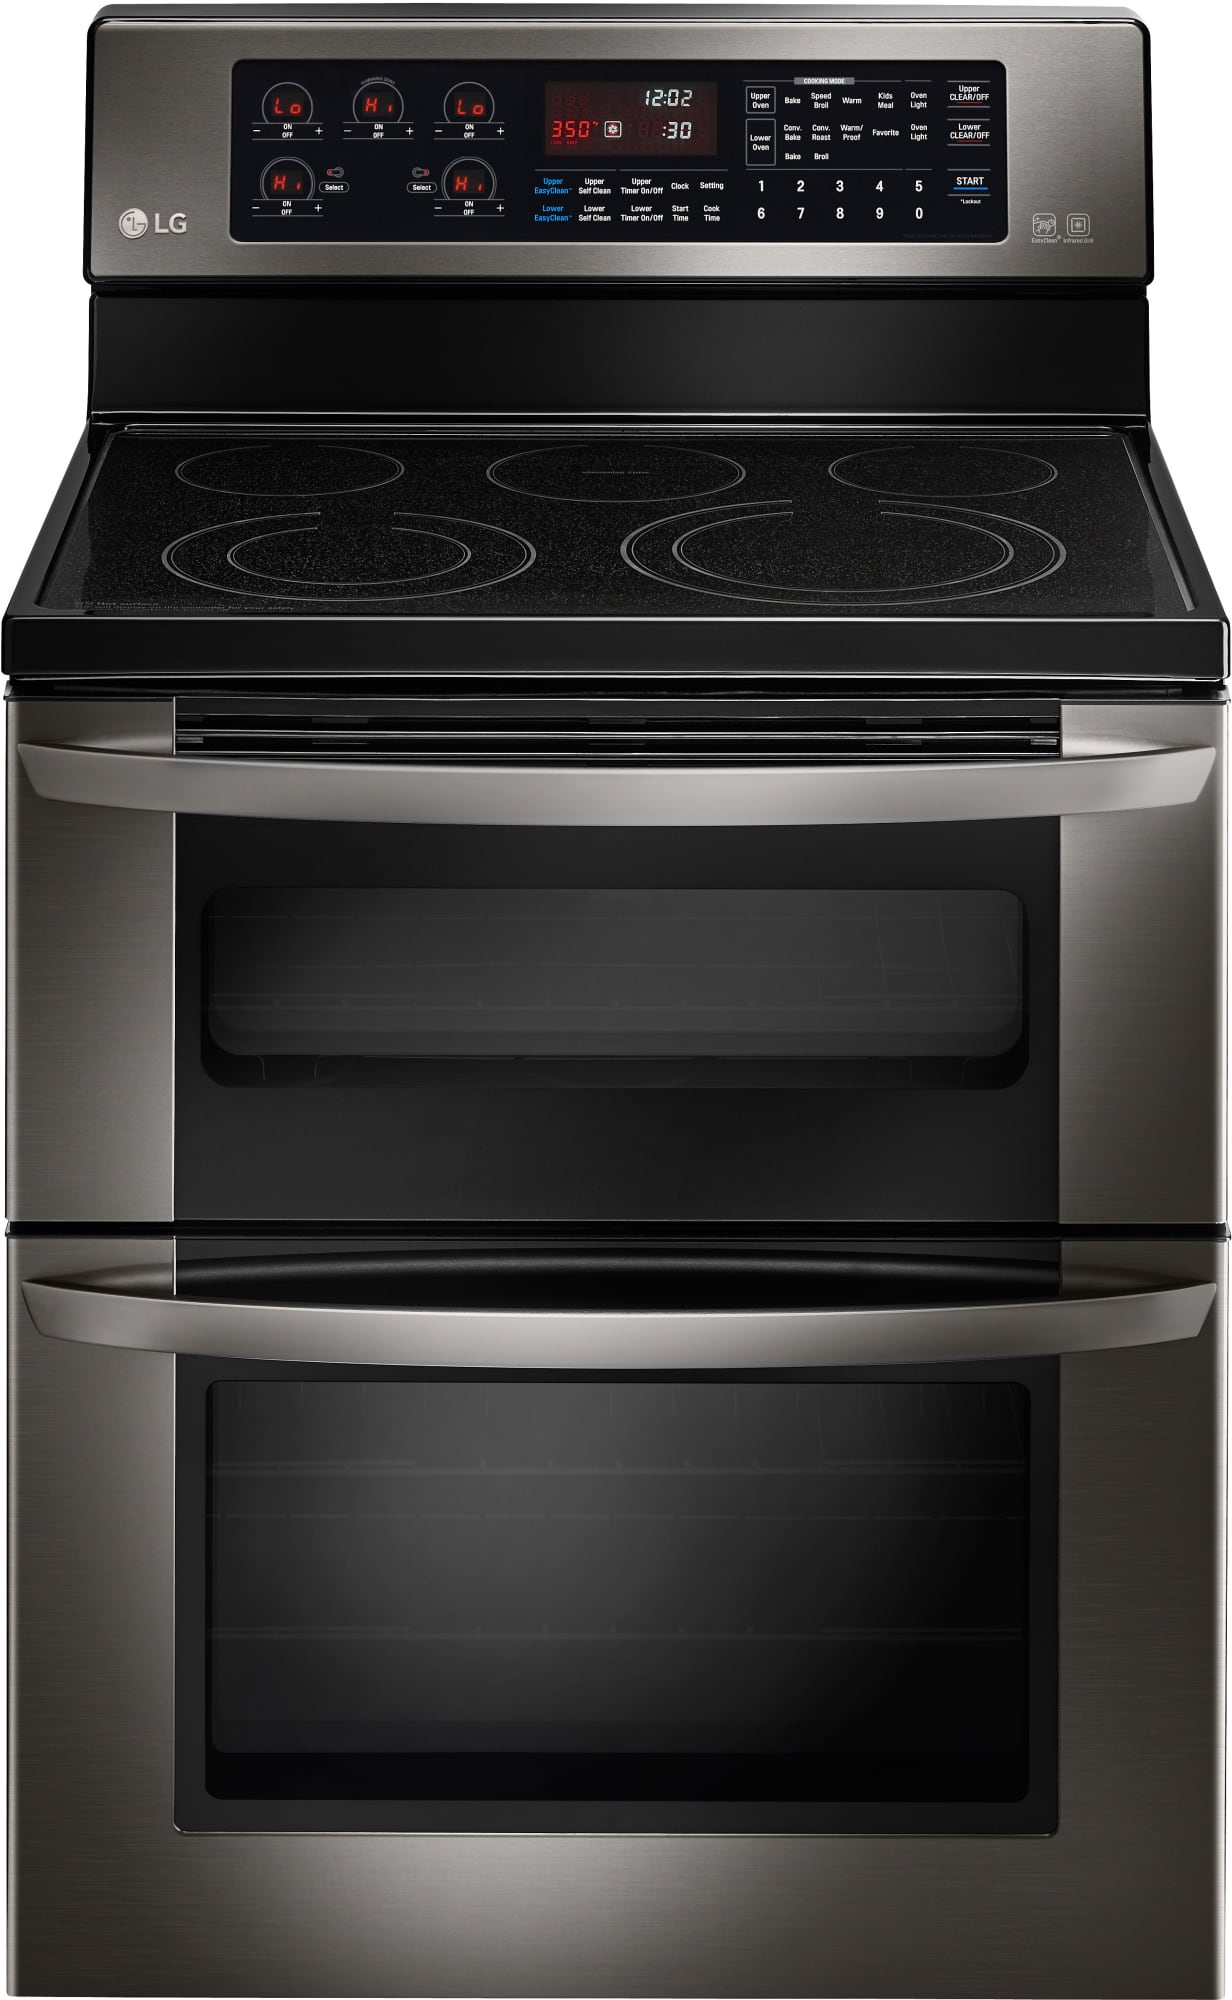 LG LDE3037BD 30 Inch Freestanding Electric Double-Oven Range with 5